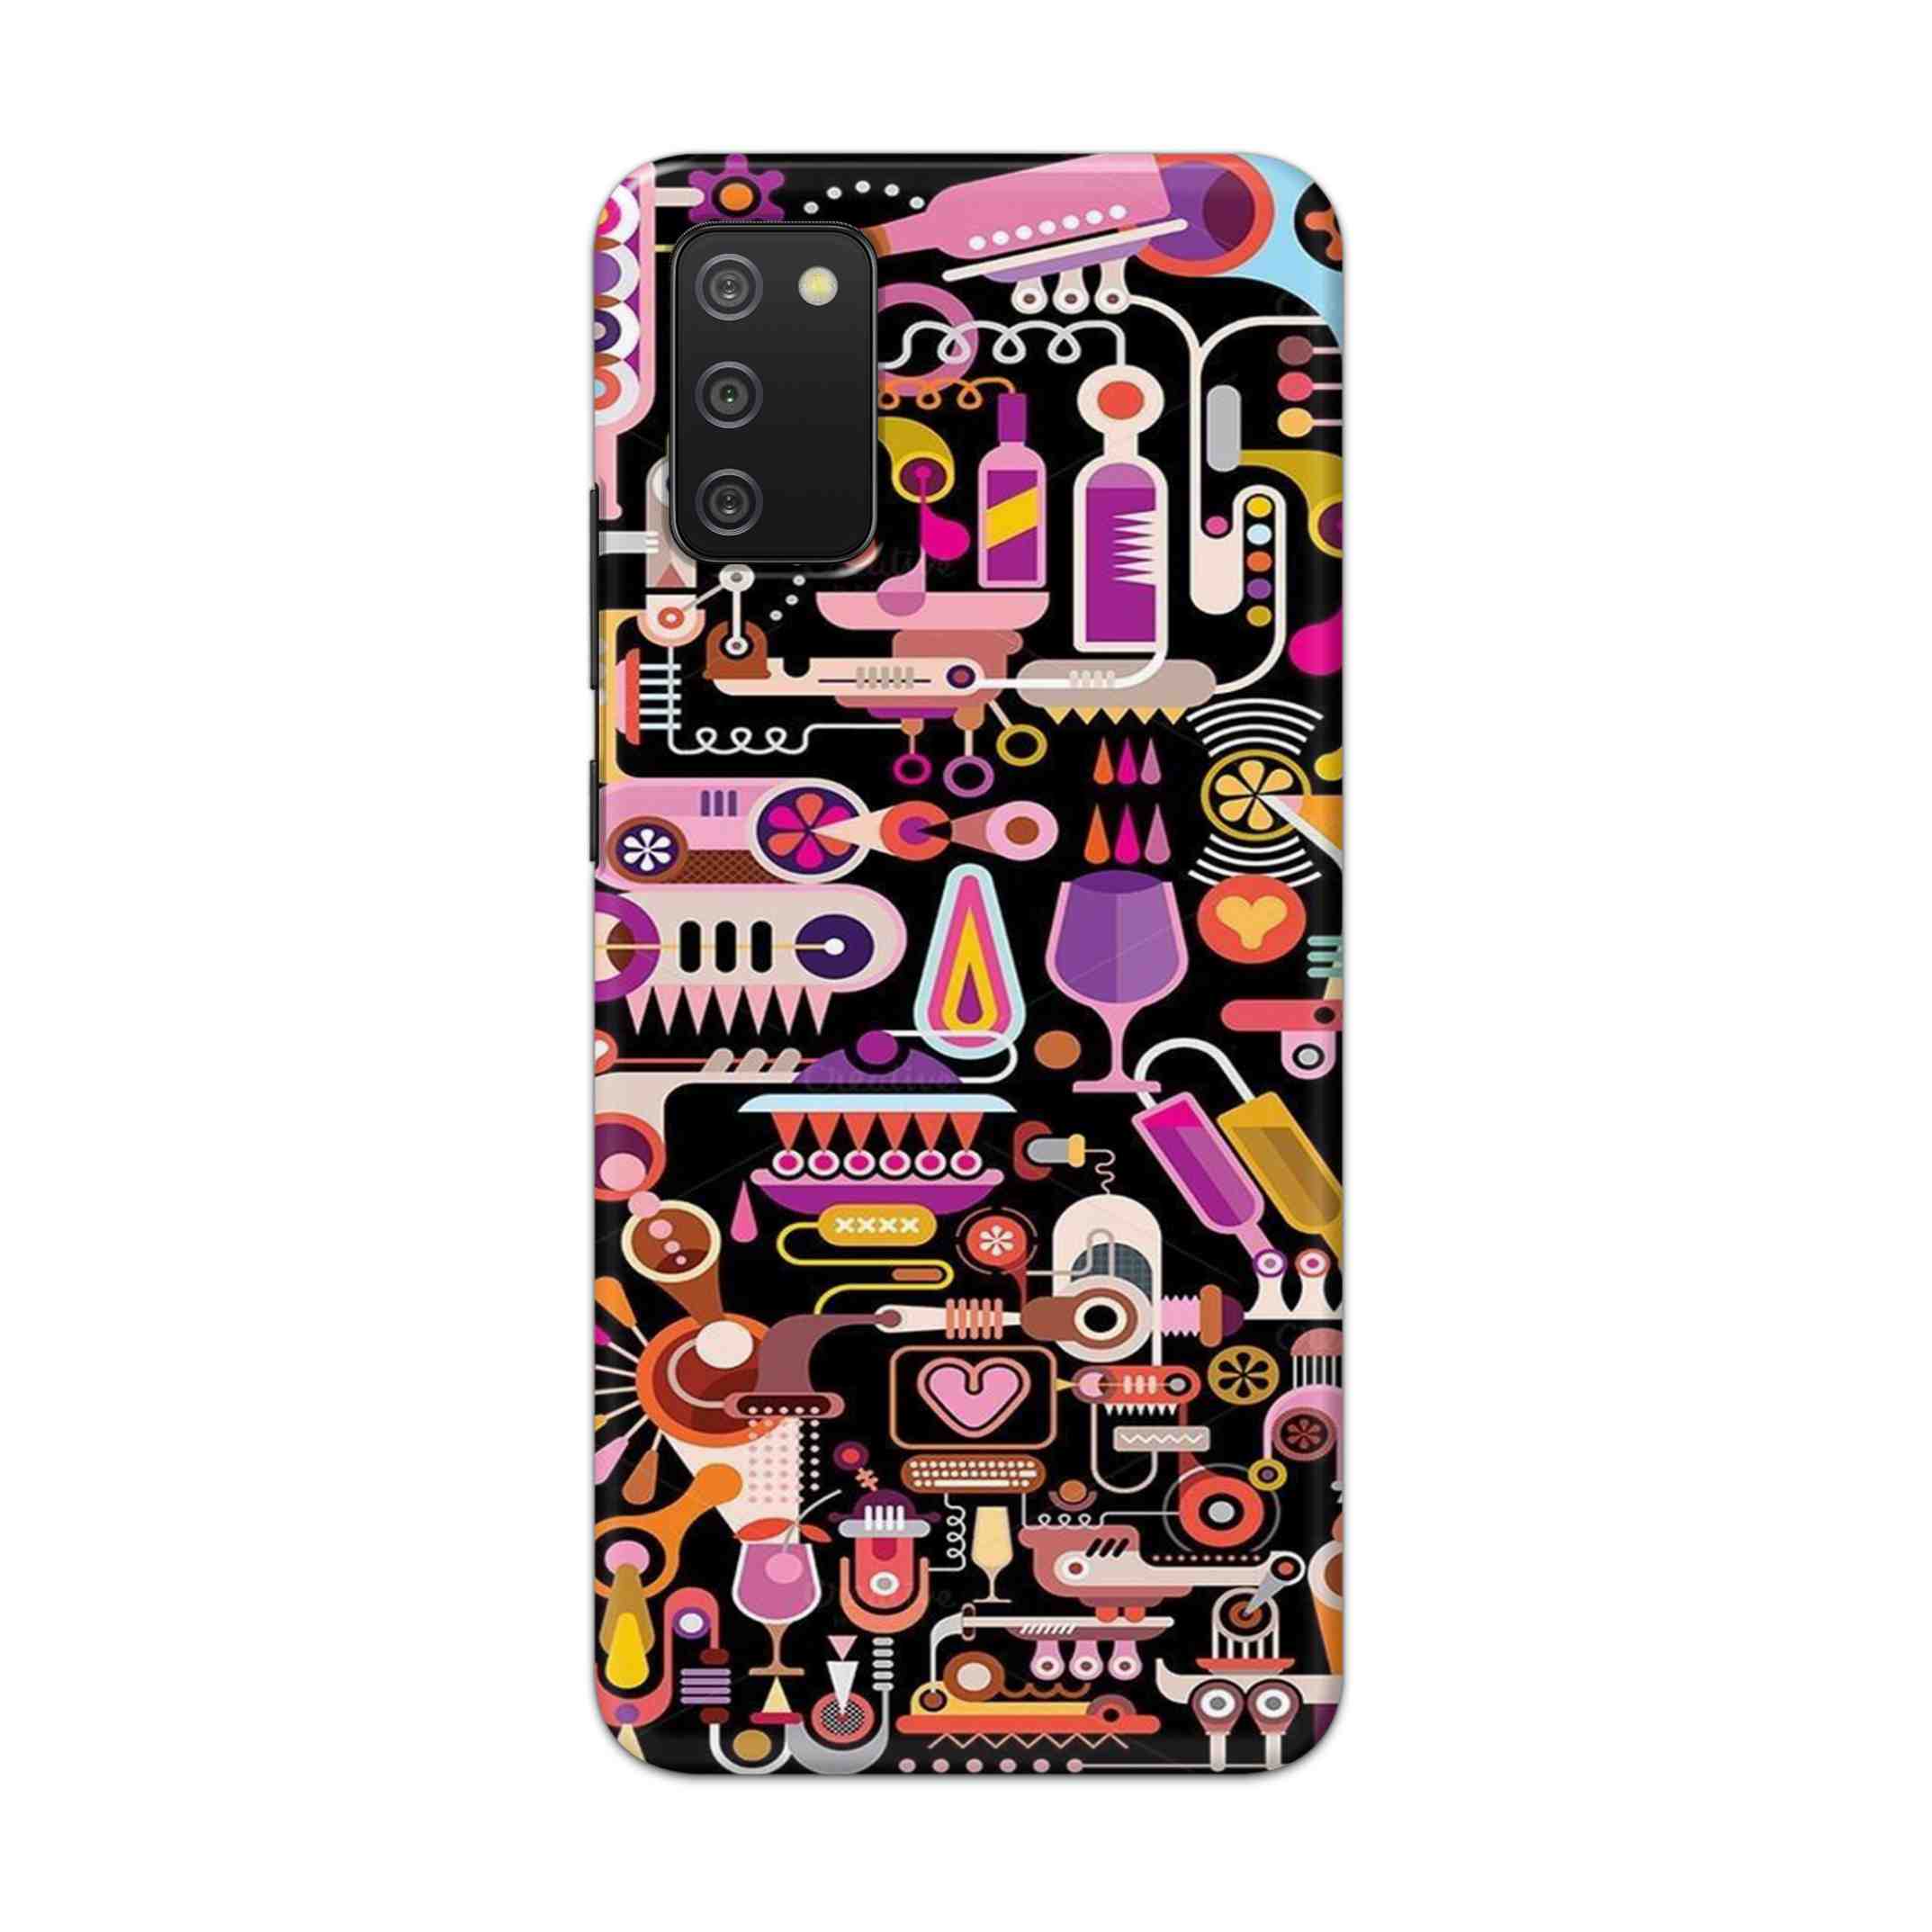 Buy Lab Art Hard Back Mobile Phone Case Cover For Samsung Galaxy M02s Online